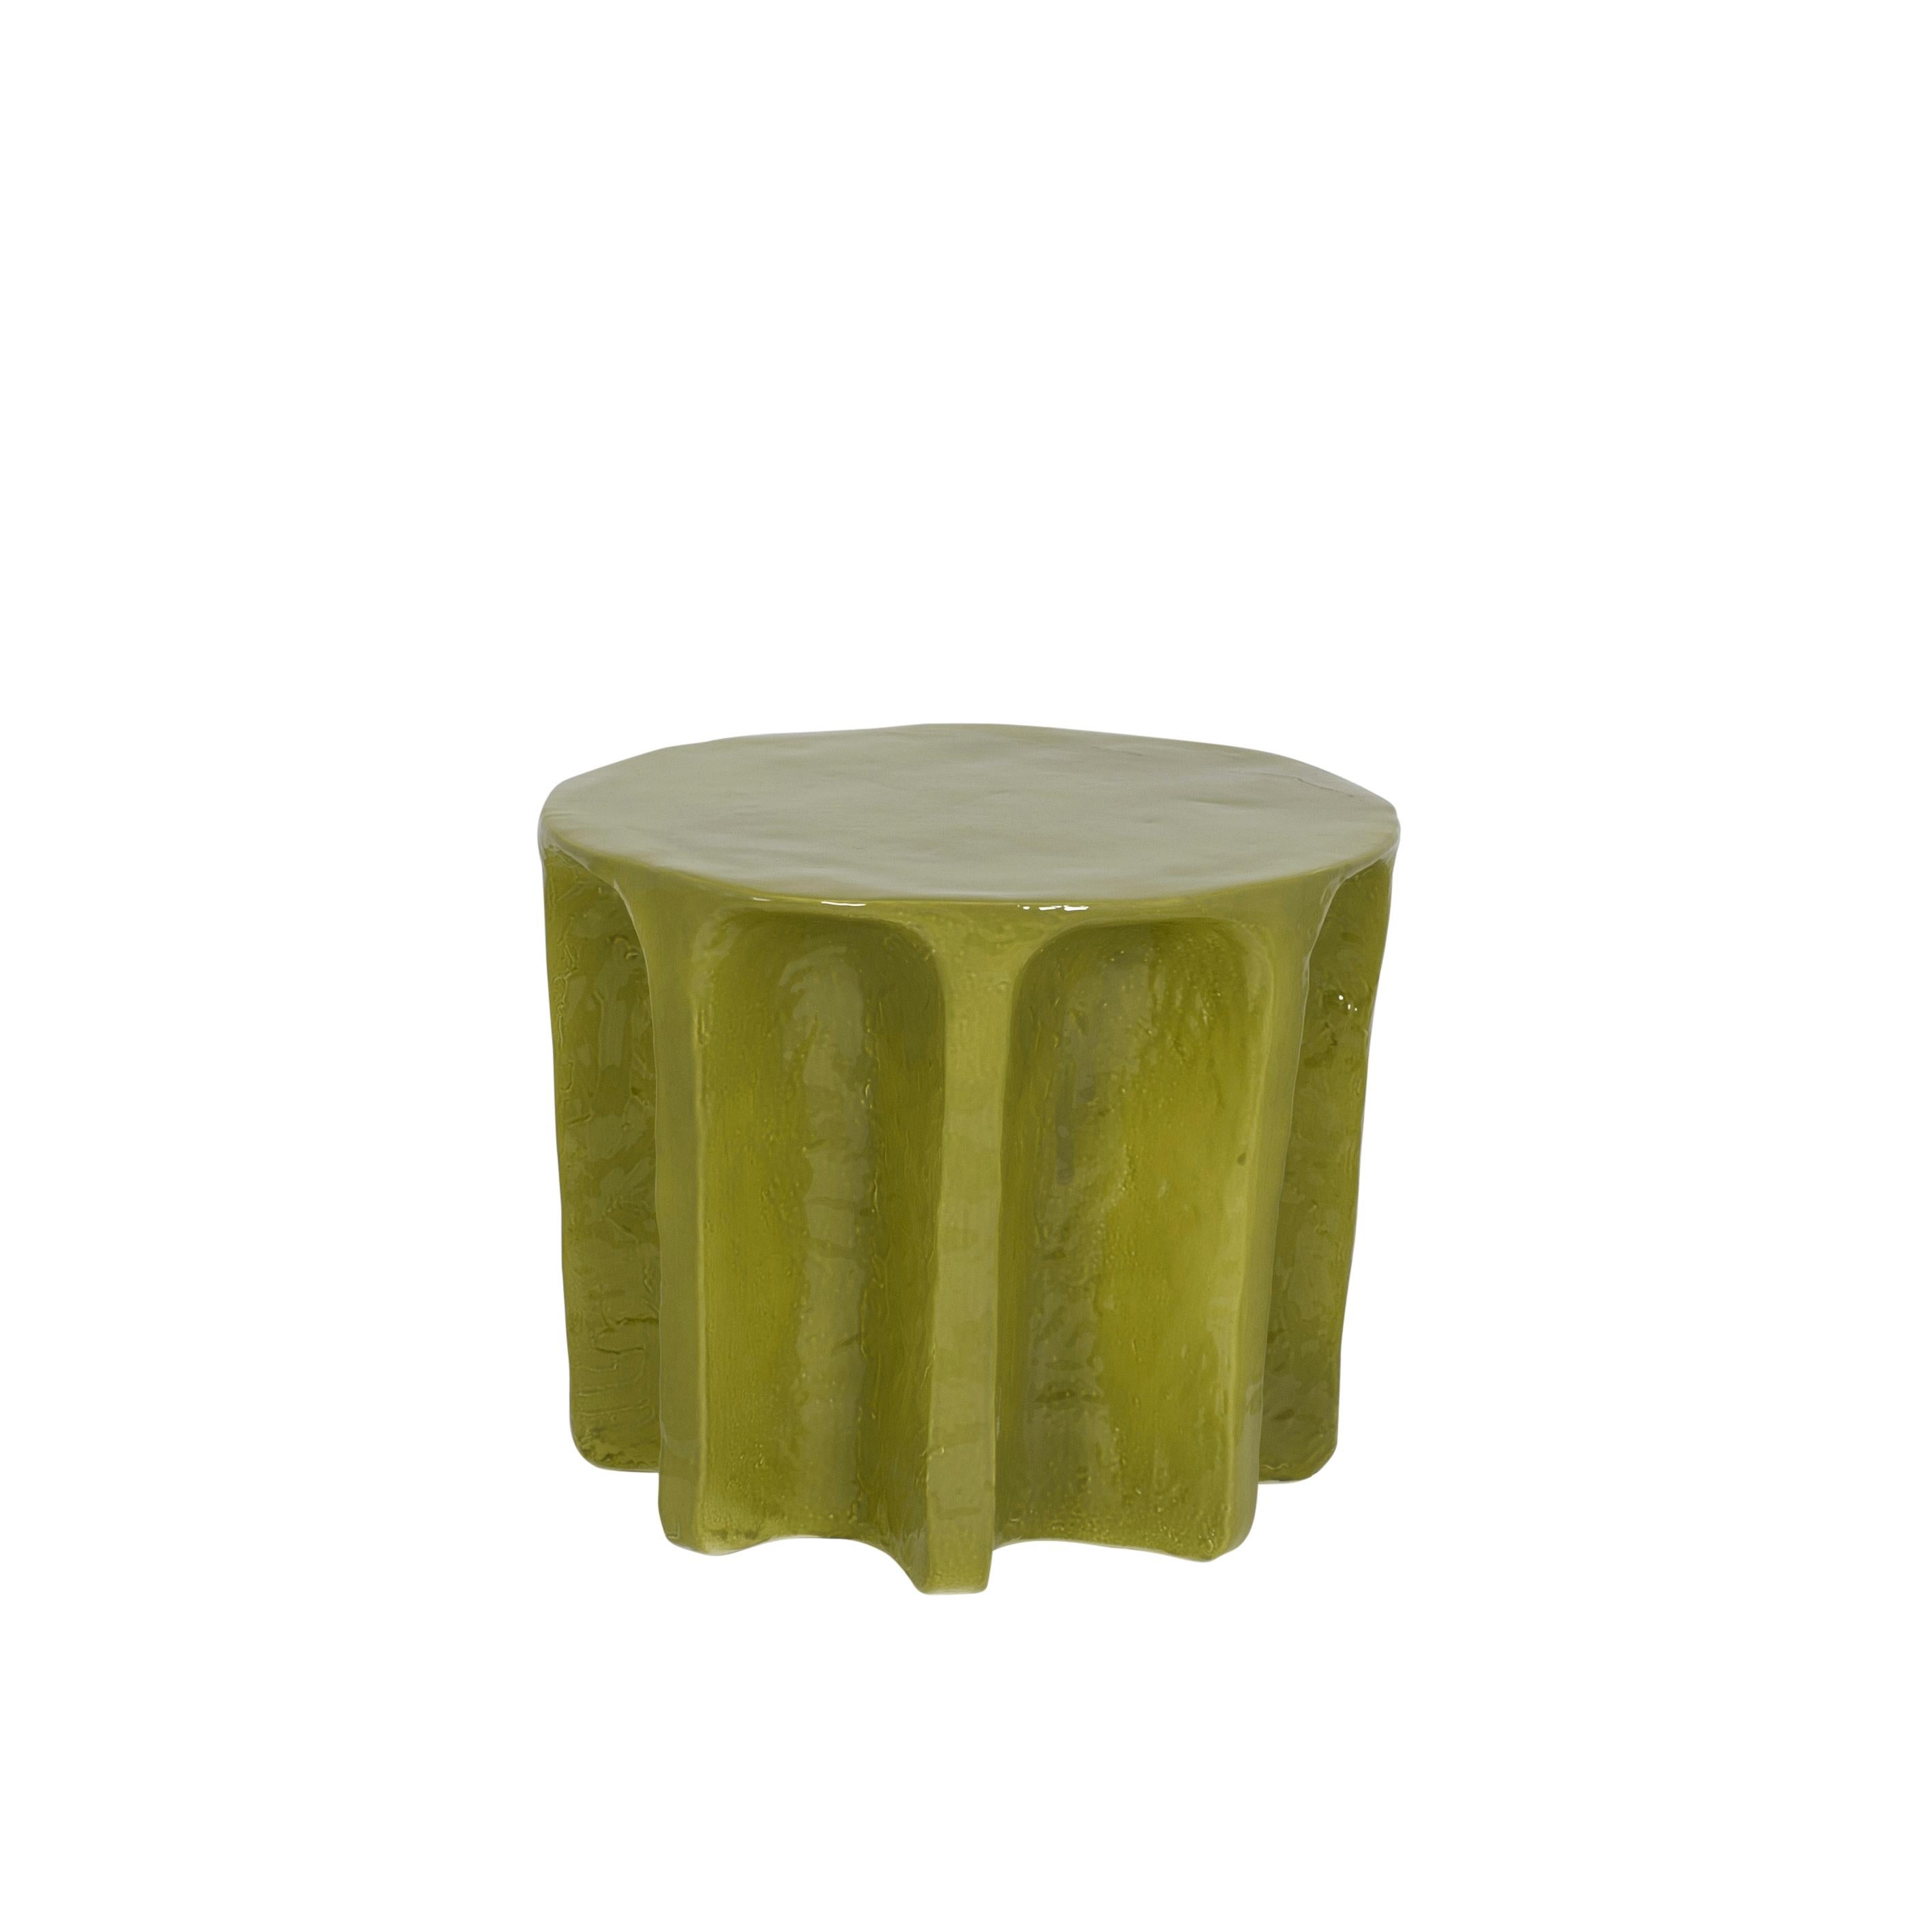 Chouchou round green coffee table by Pulpo
Dimensions: D55 x H45 cm
Materials: ceramic

Also available in different Colours.

Chouchou bears the contours of an antique column – which, knowing designer Lorenzo Zanovello’s, is most likely a